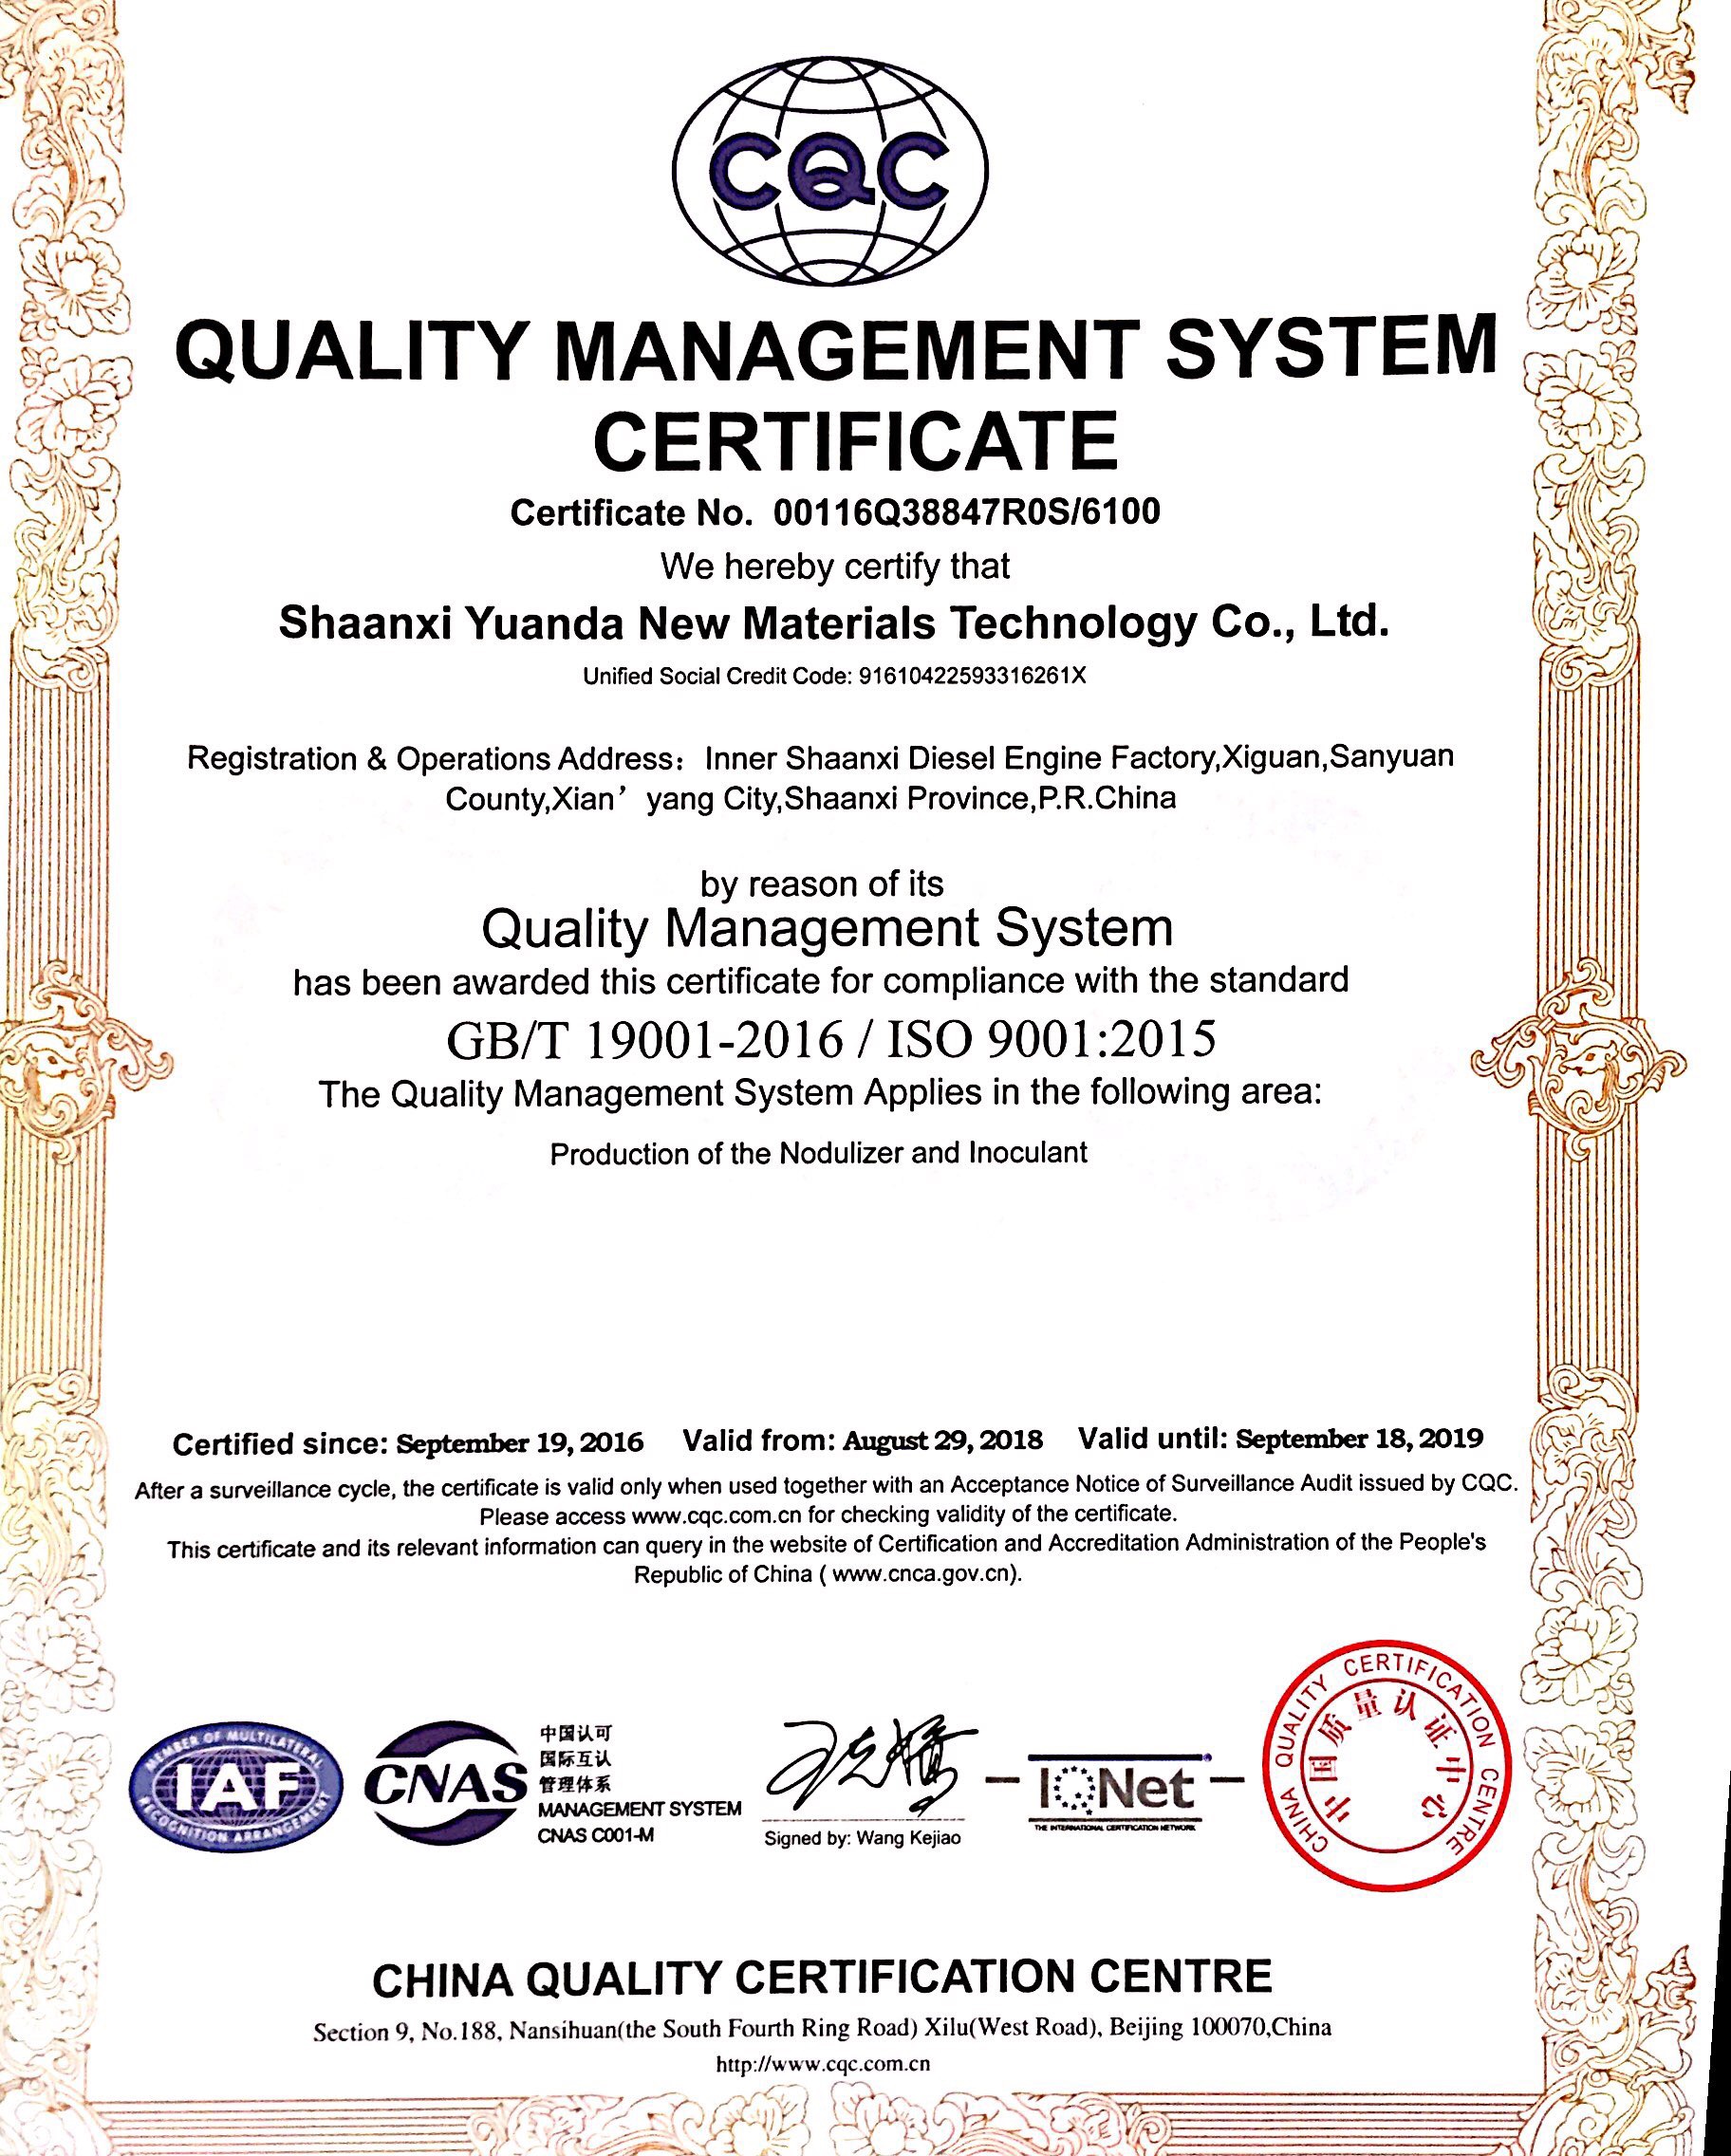 Quality System Certificate